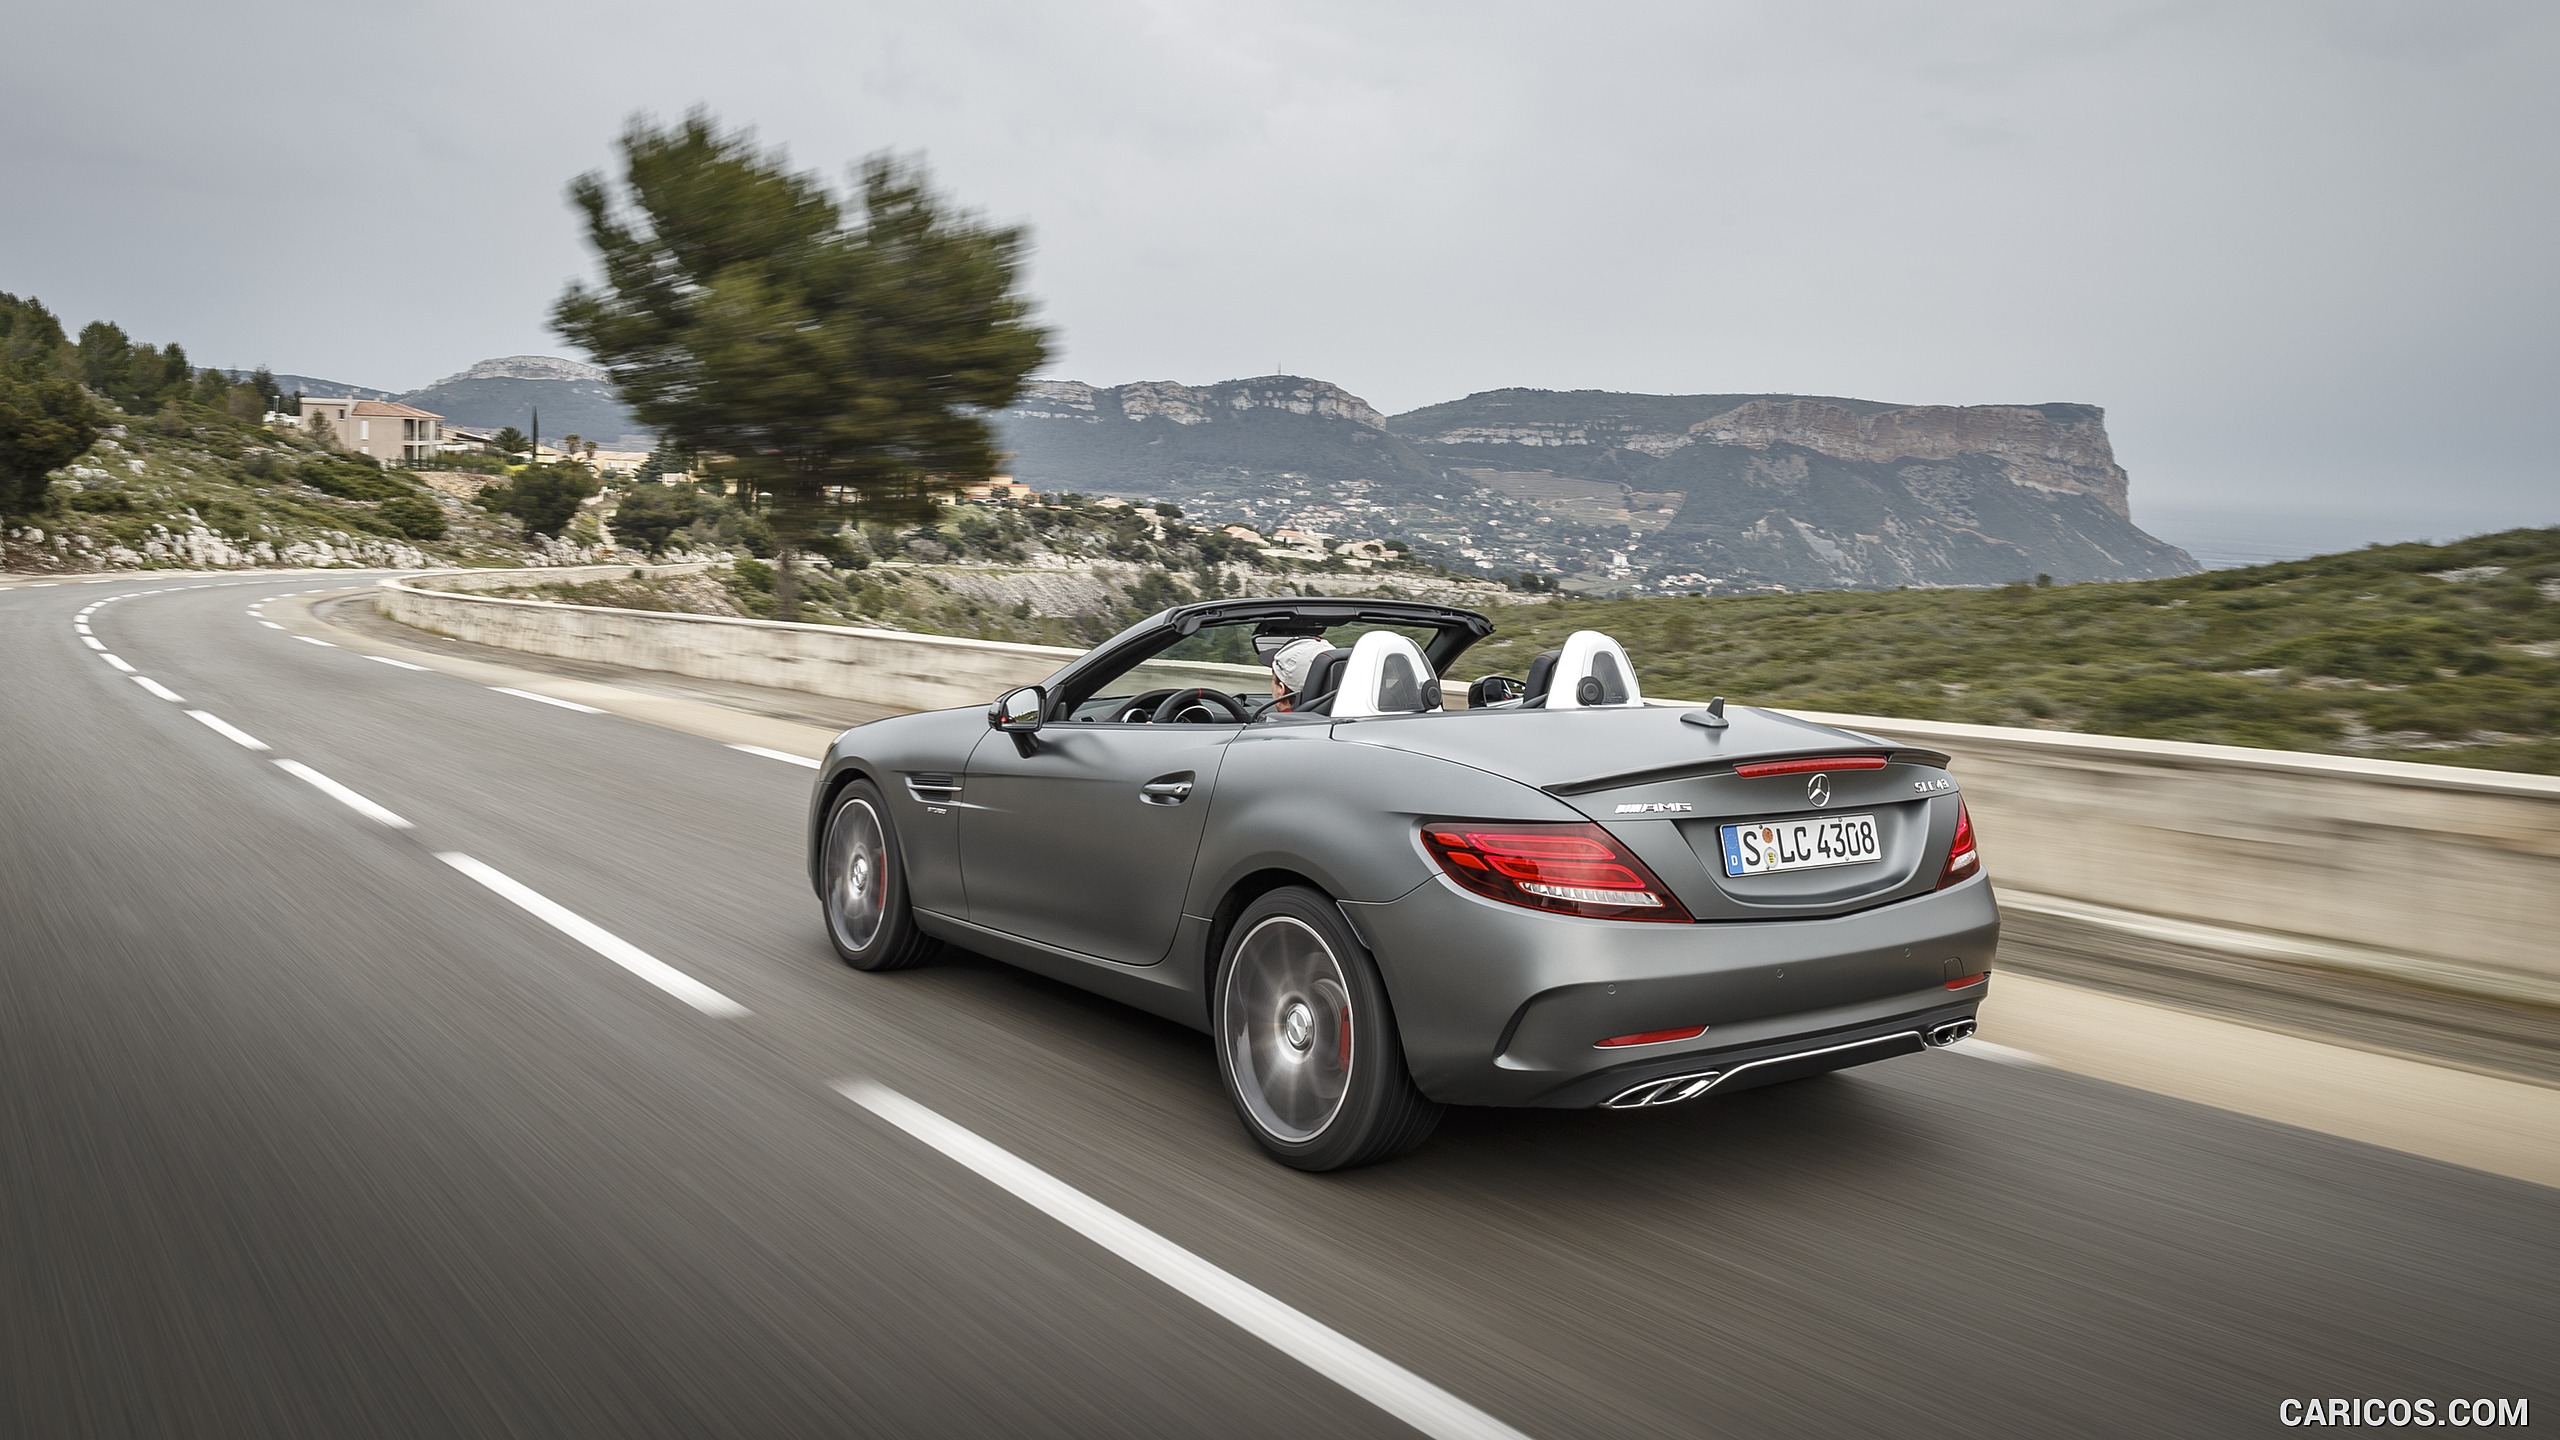 2017 Mercedes-AMG SLC 43 - Top Down - Rear, #51 of 92